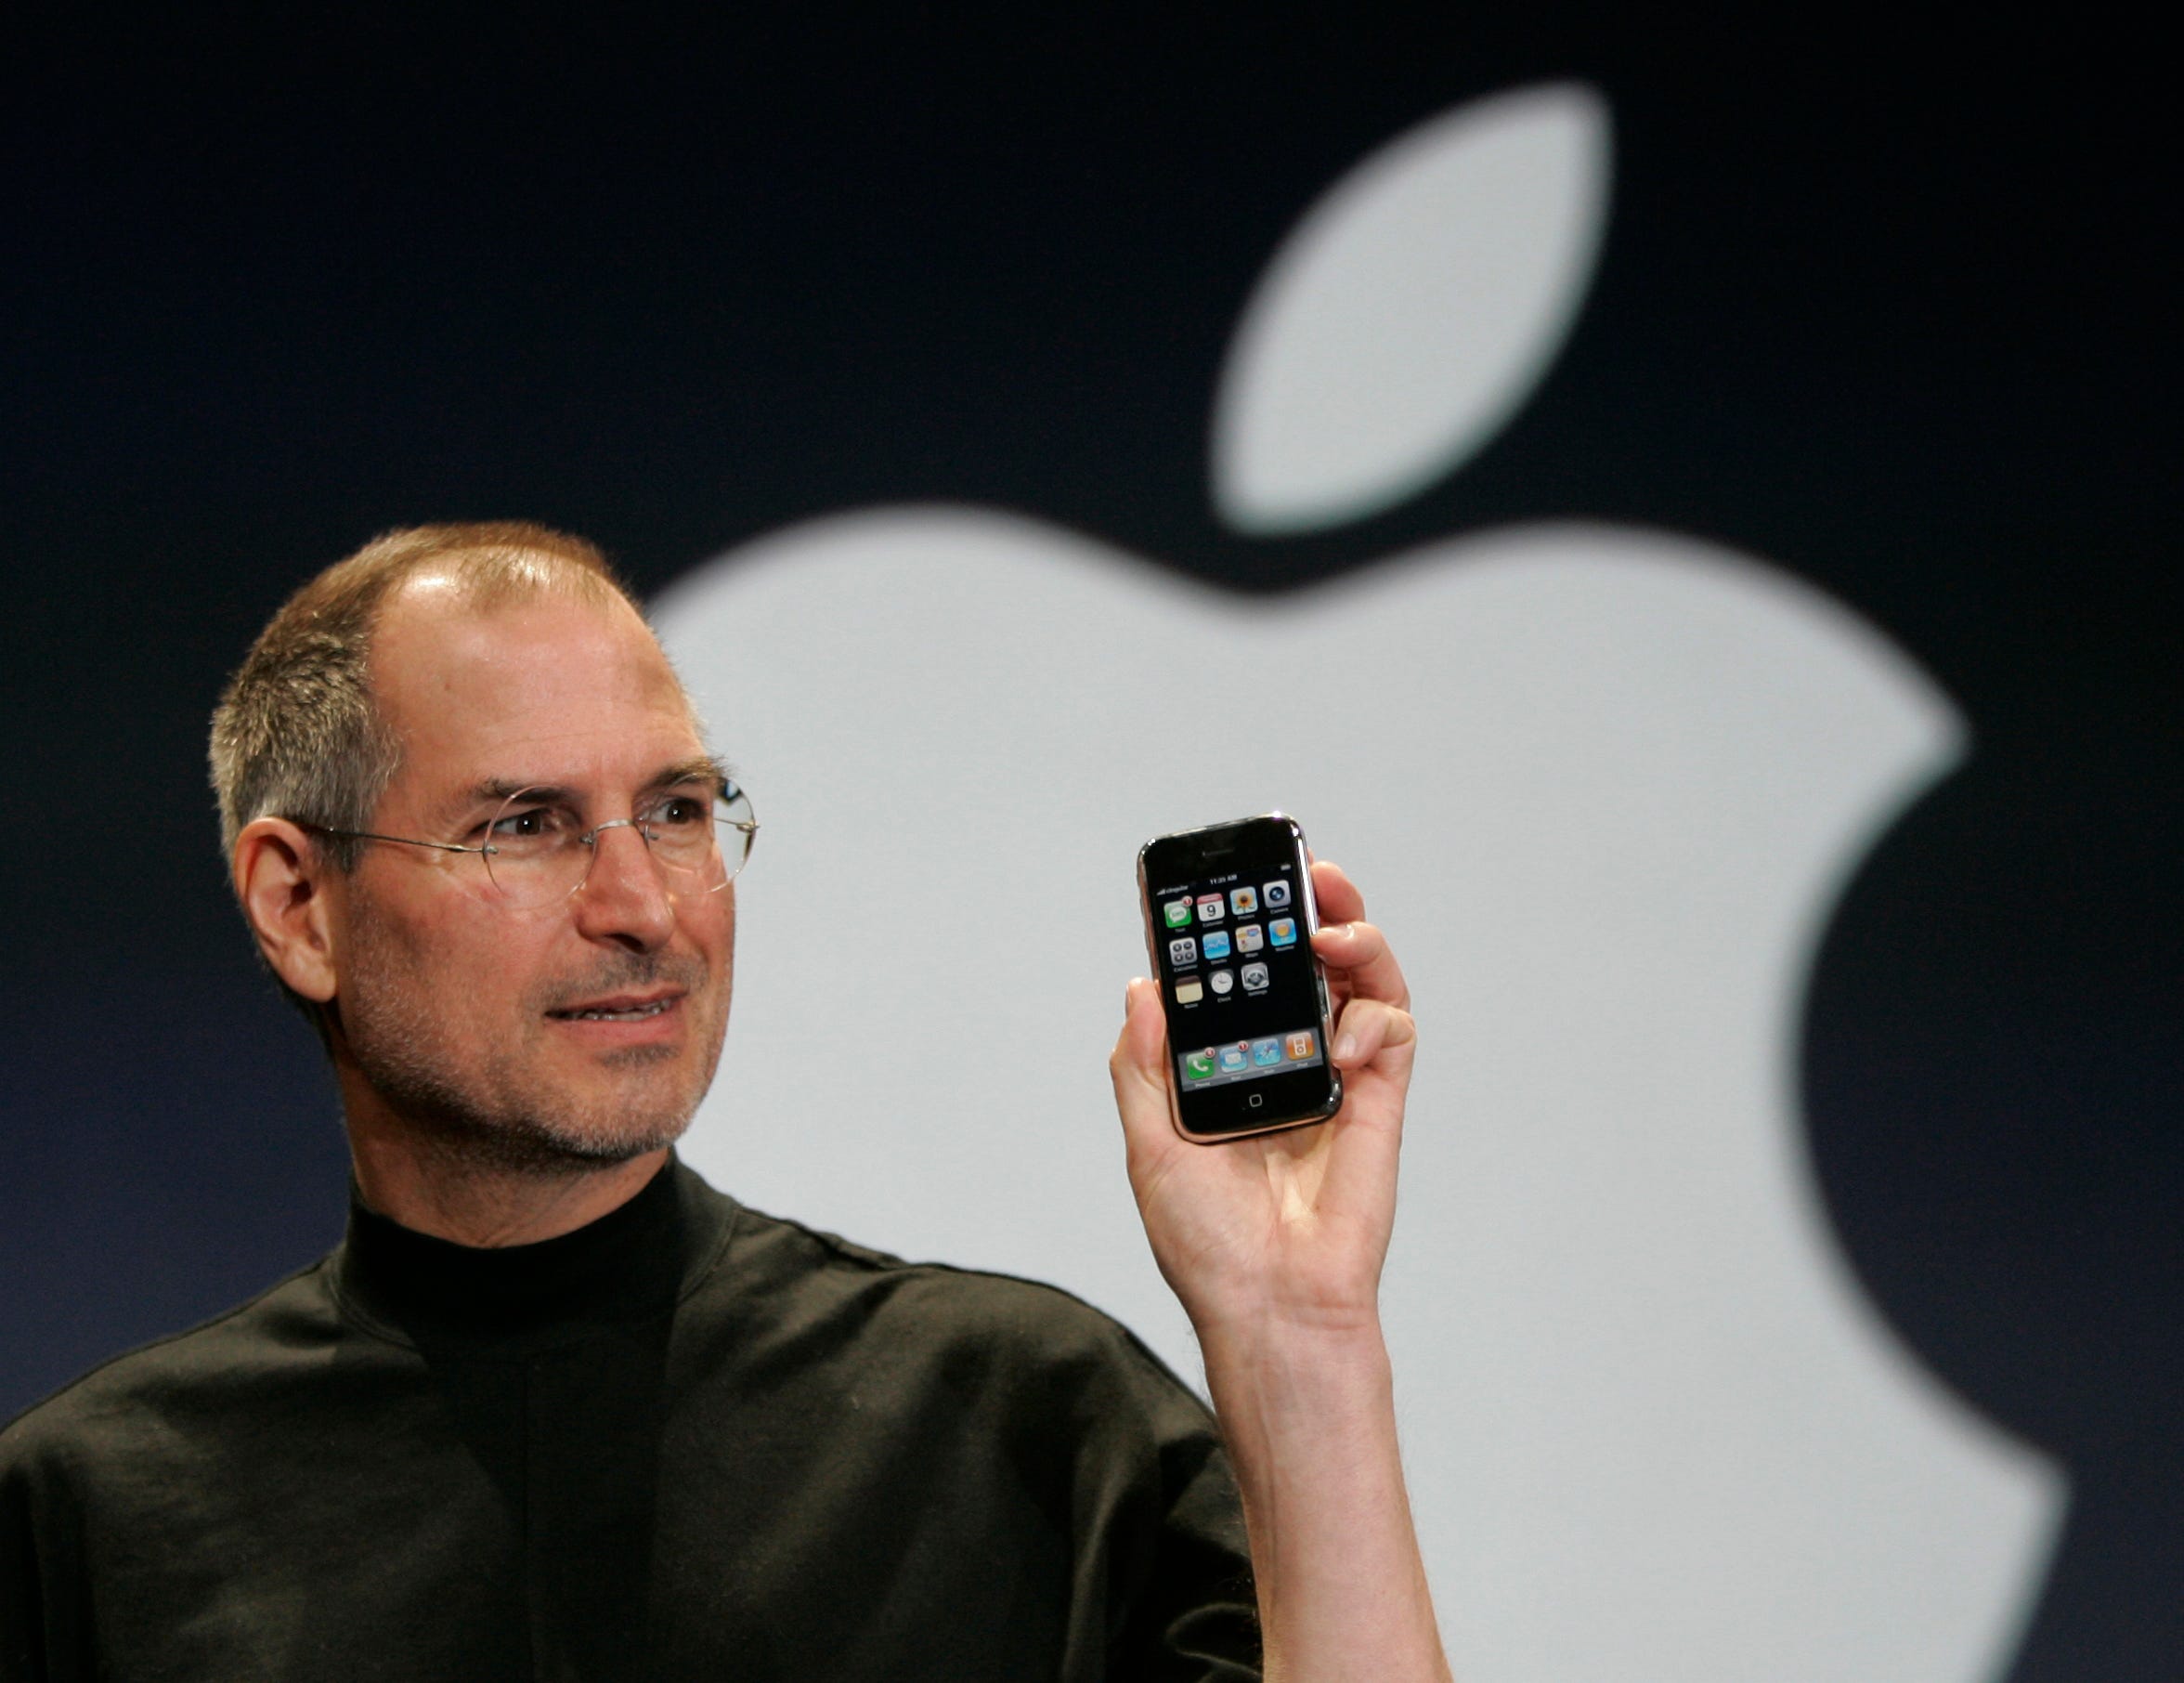 Fact check: Steve Jobs' last words weren't a commentary on wealth